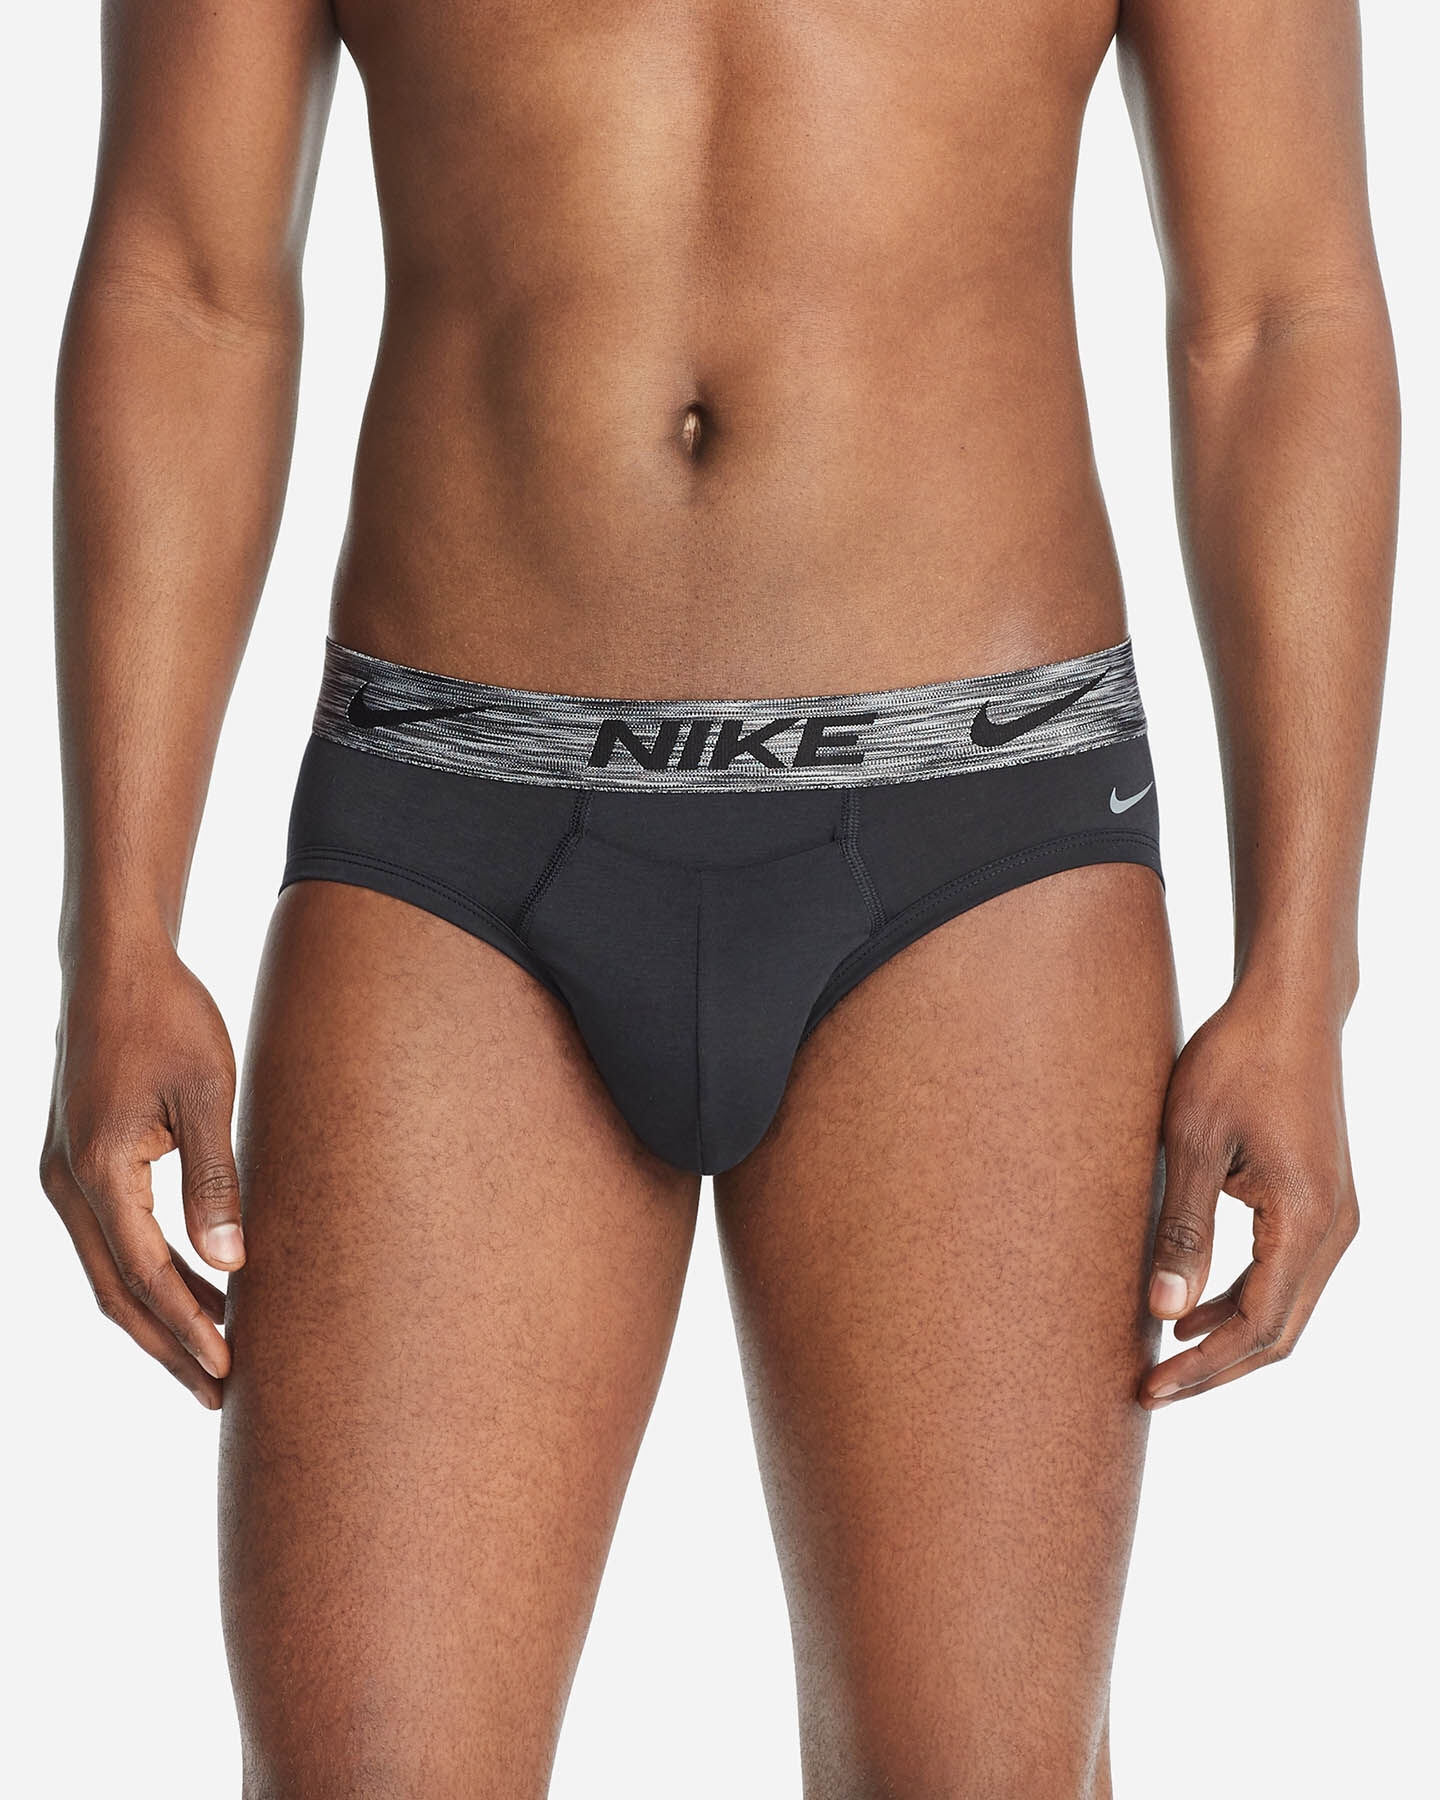  Intimo NIKE 2PACK SLIP RELUX M S4099901|UB1|S scatto 1